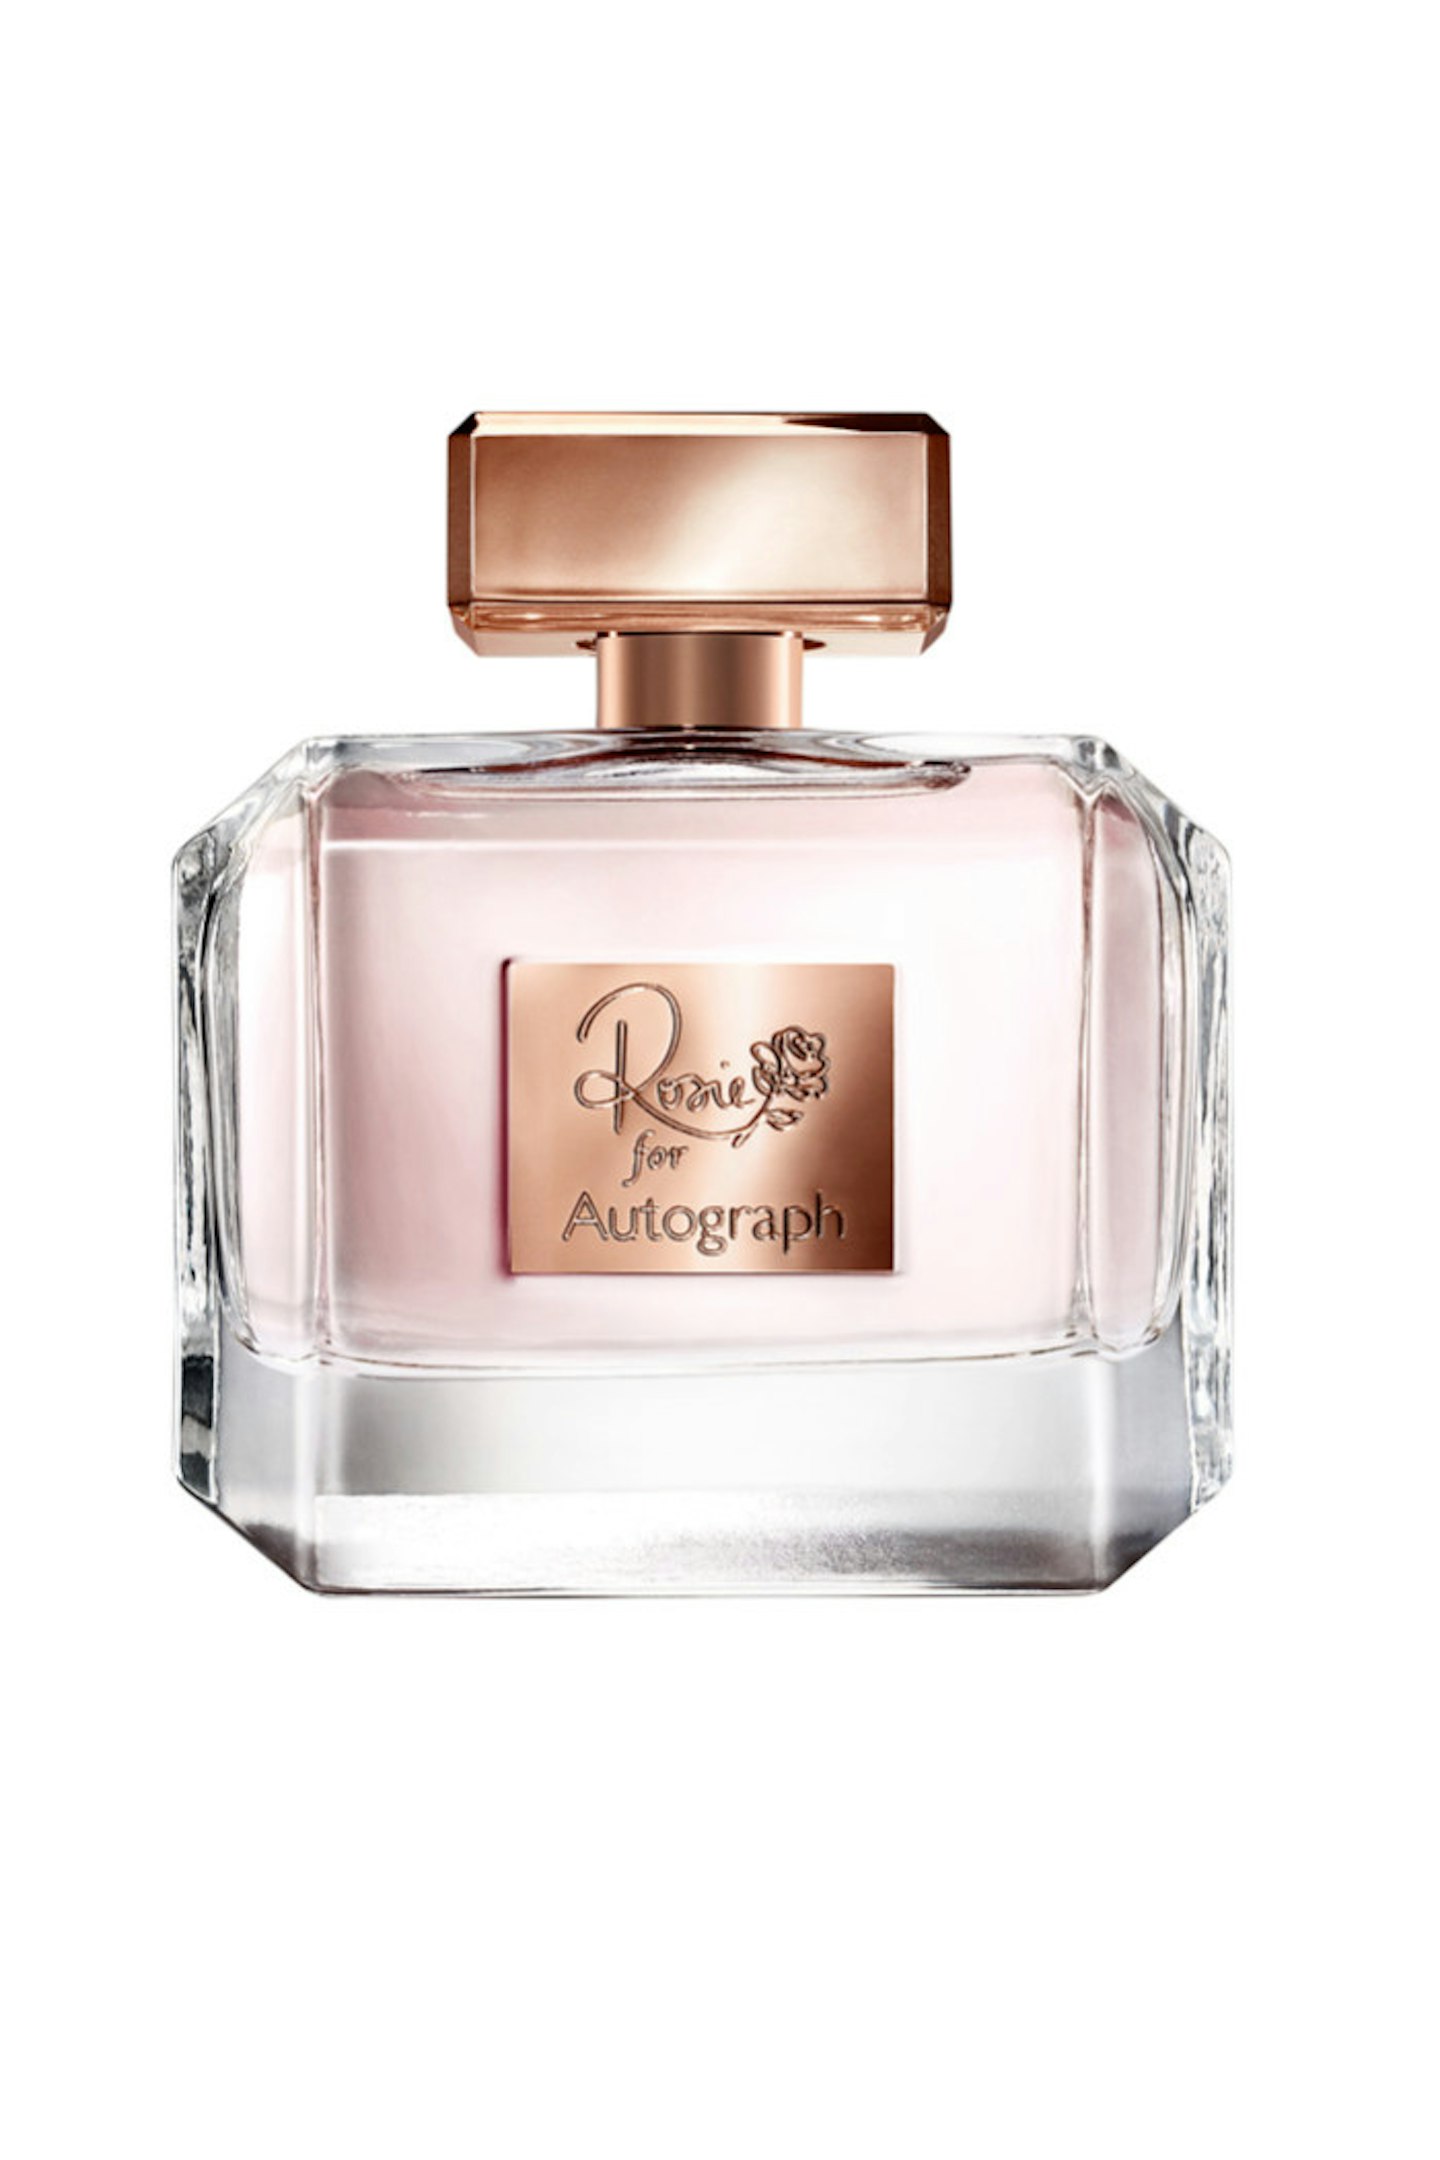 Rosie for Autograph EDP, £28.00